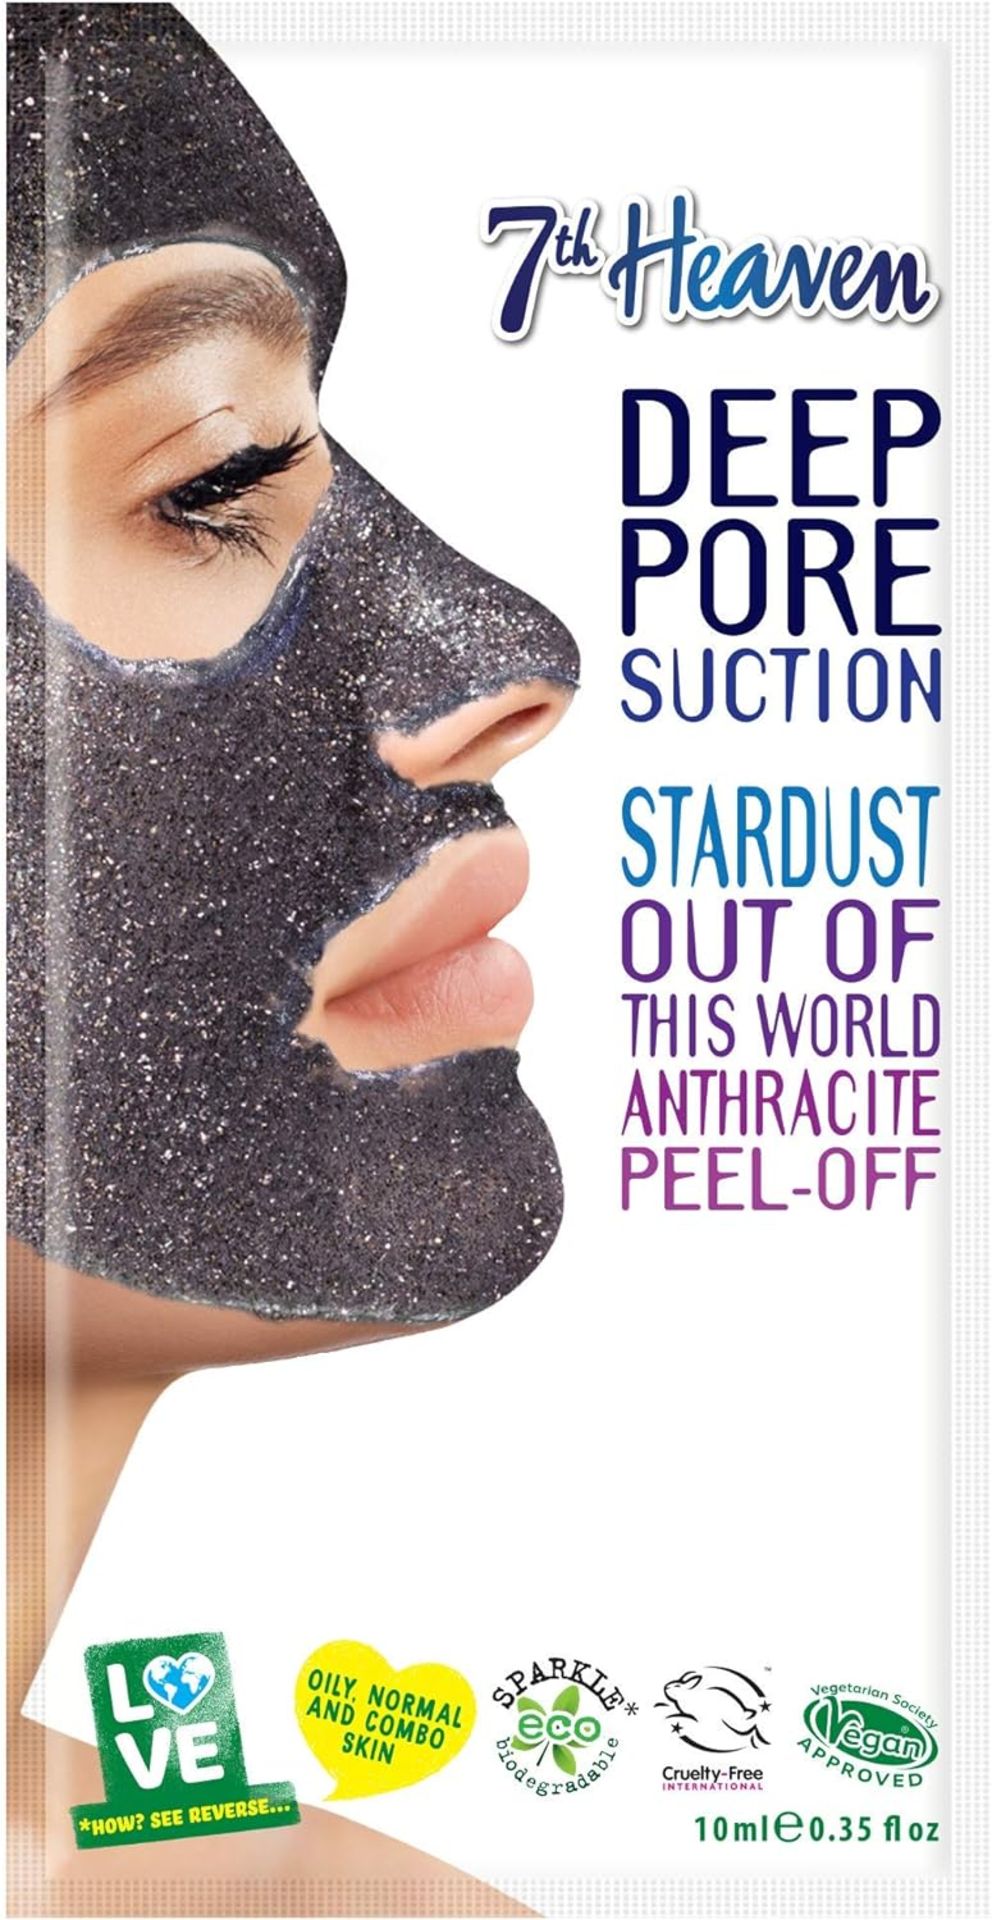 122 X BRAND NEW 7TH HEAVEN DEEP PORE SUCTION STARDUST OUT OF THIS WORLD ANTHRACITE PEEL OFF MASKS